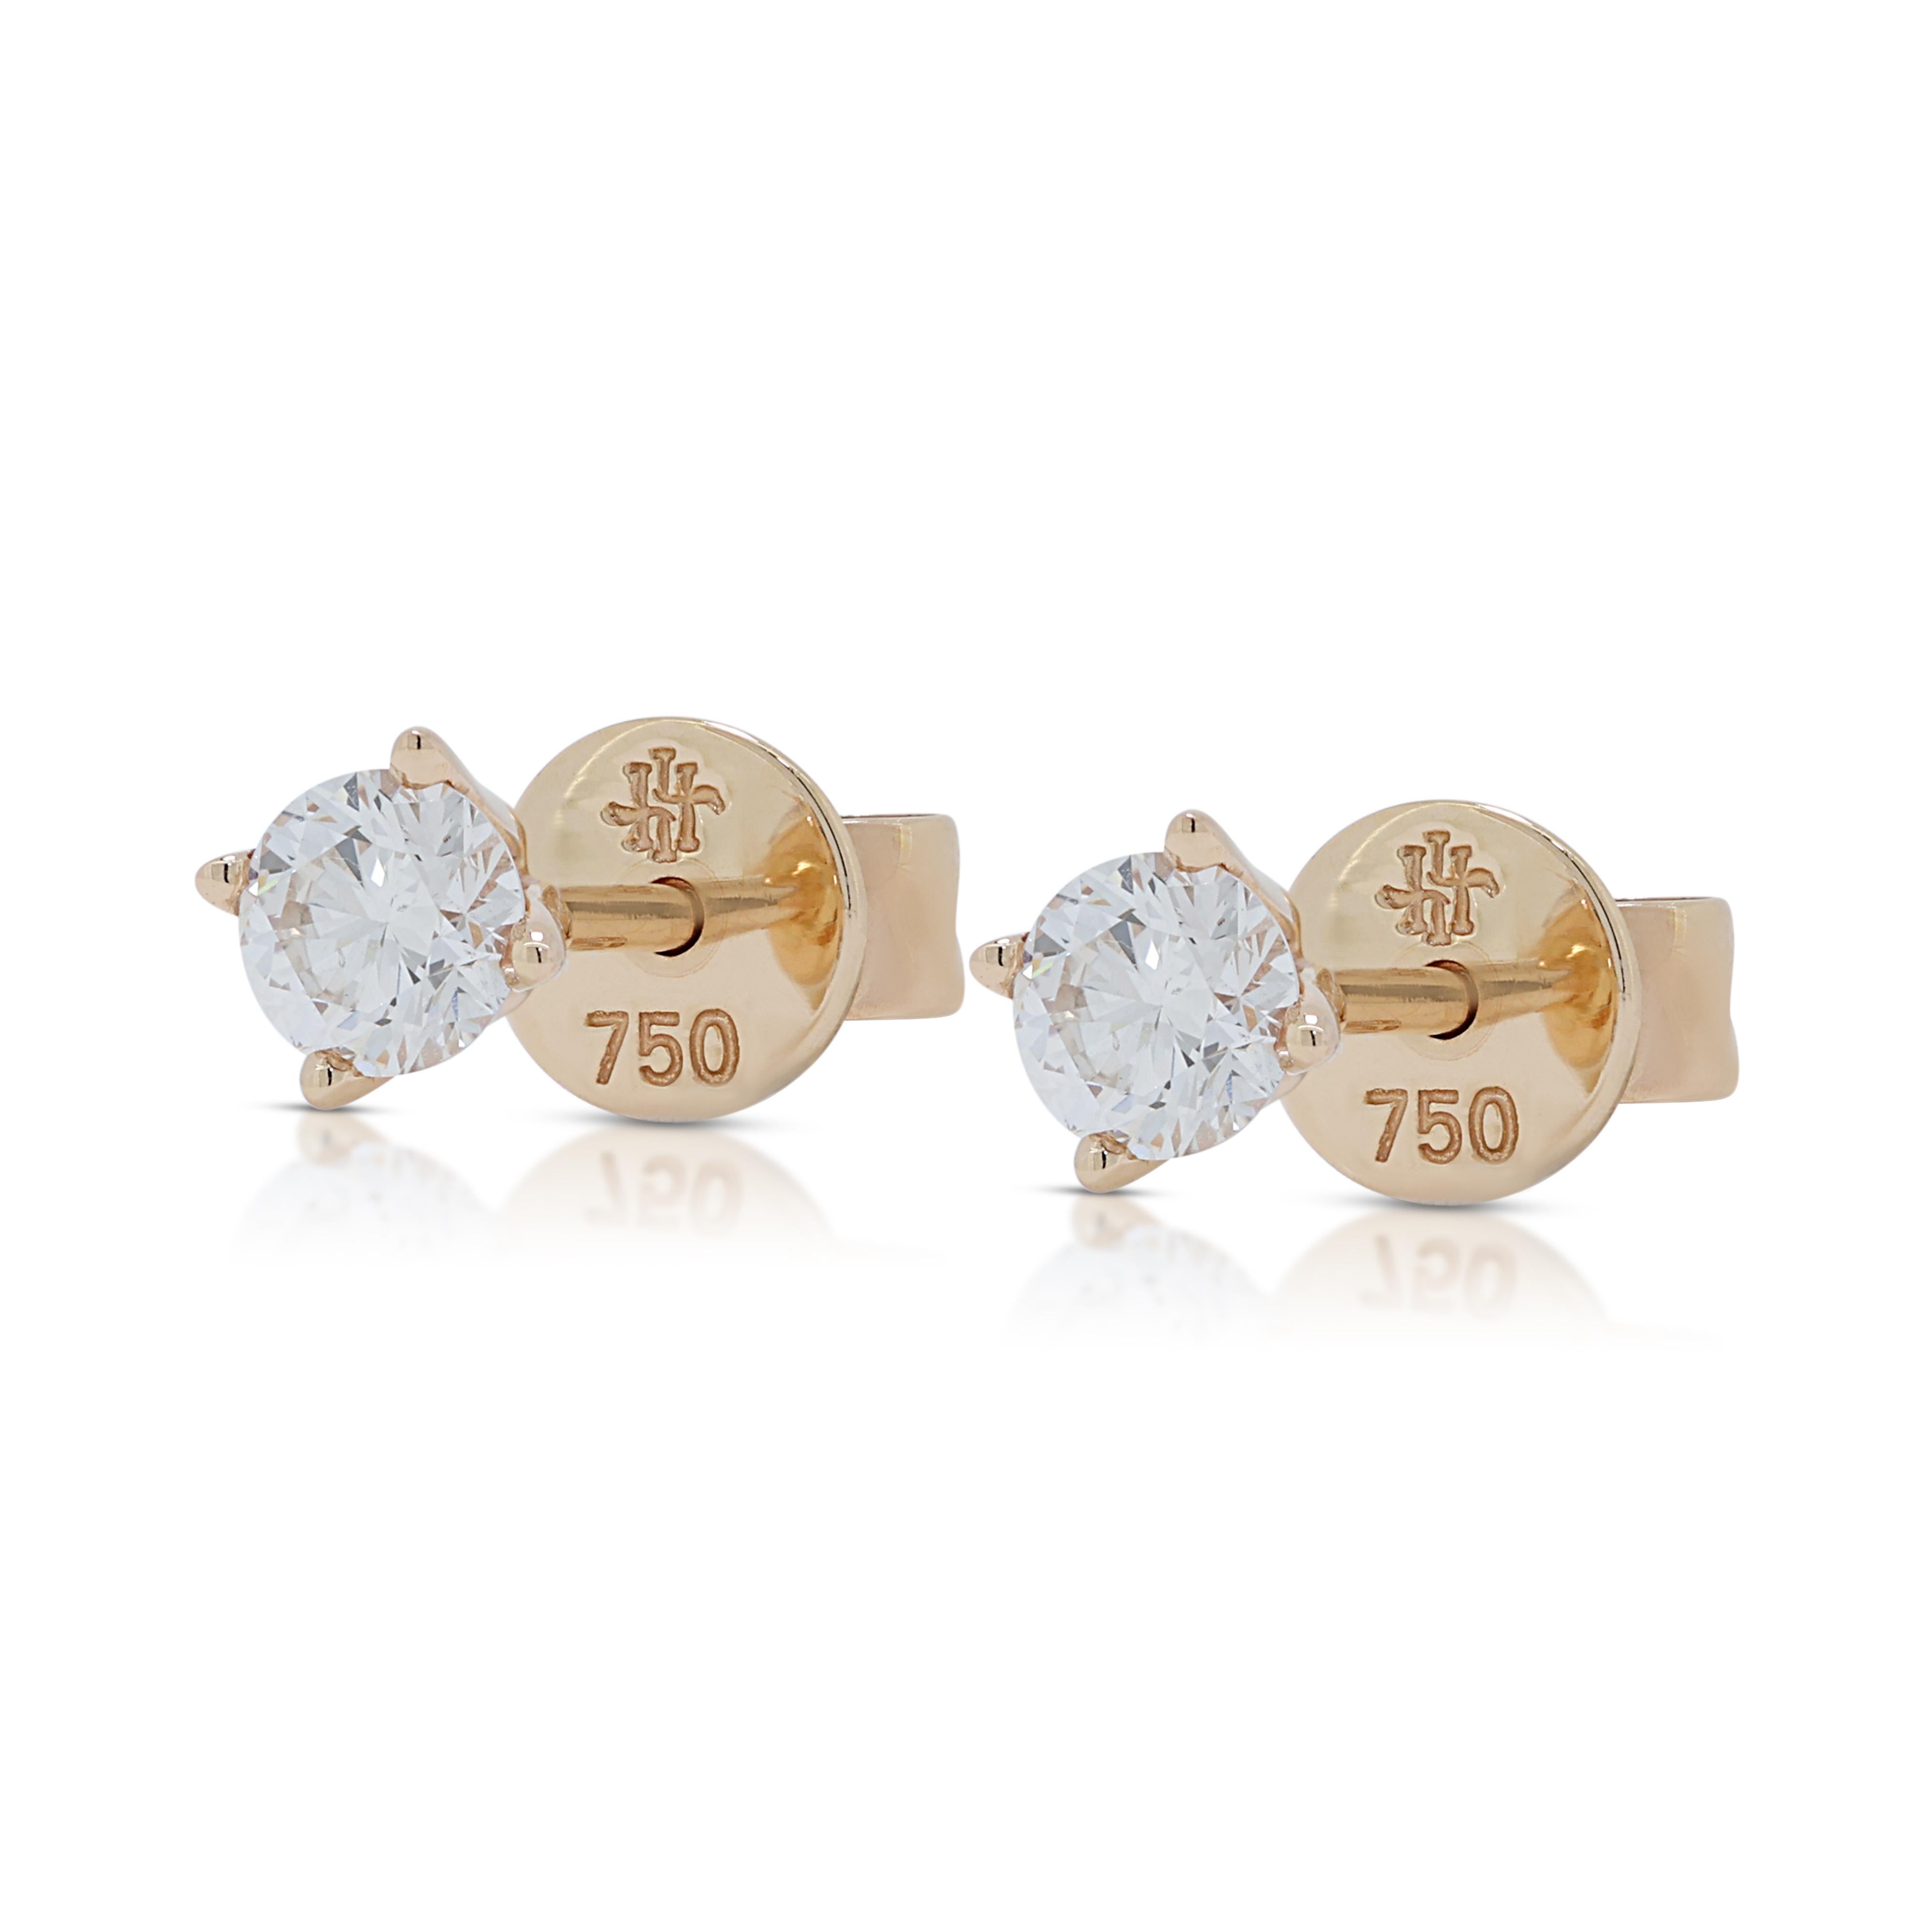 Stunning 0.34ct Diamond Stud Earrings in 18K Rose Gold  In Excellent Condition For Sale In רמת גן, IL